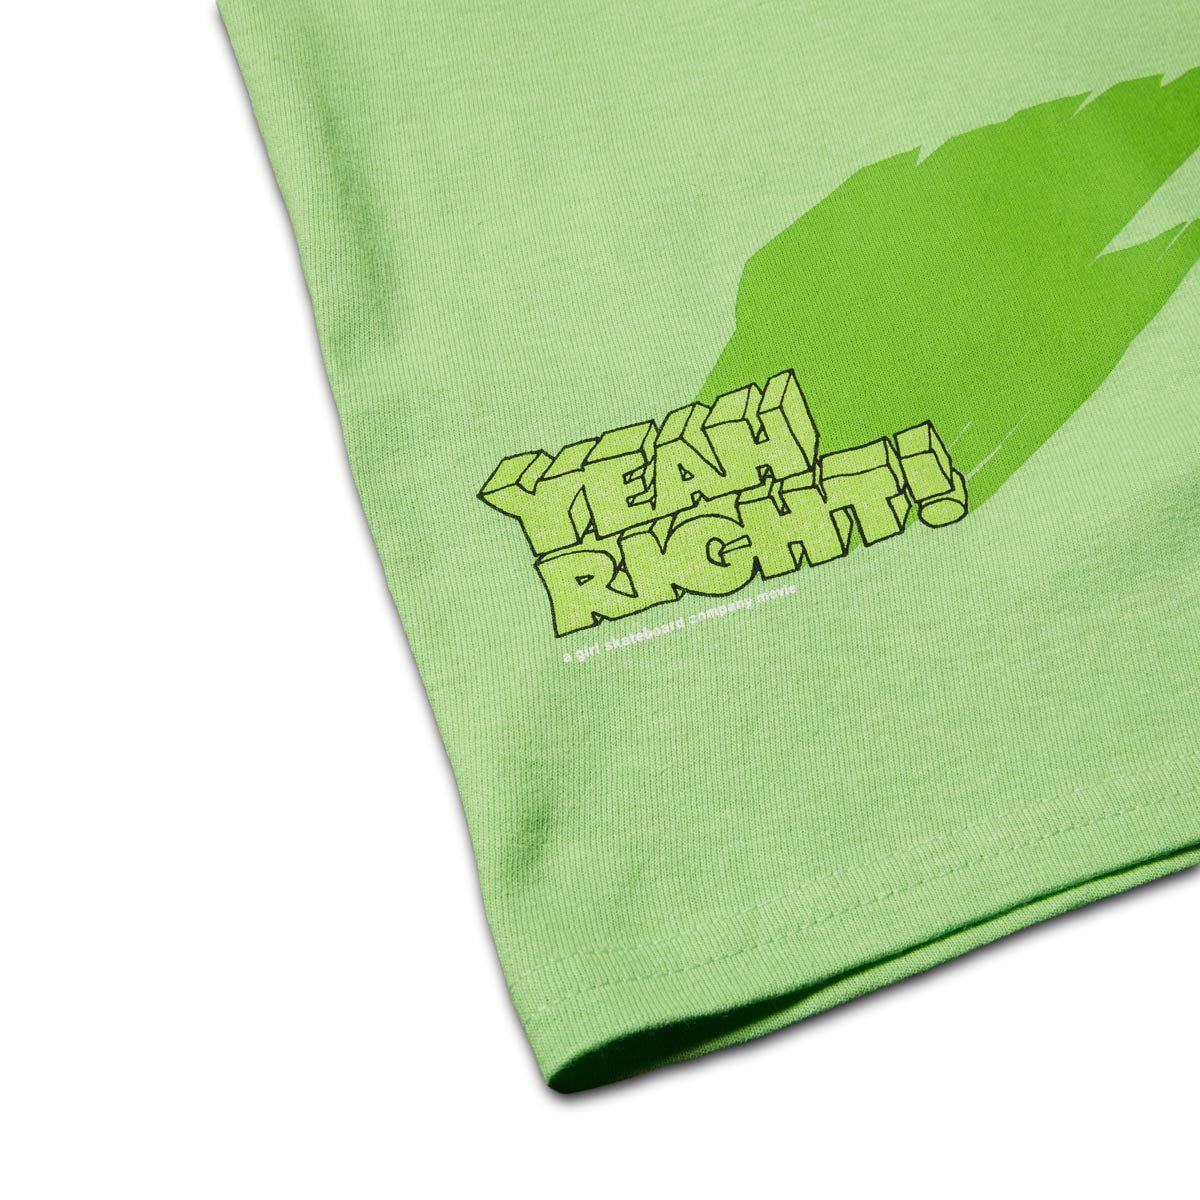 Girl Yeah Right Shadow T-Shirt - Lime Green image 2